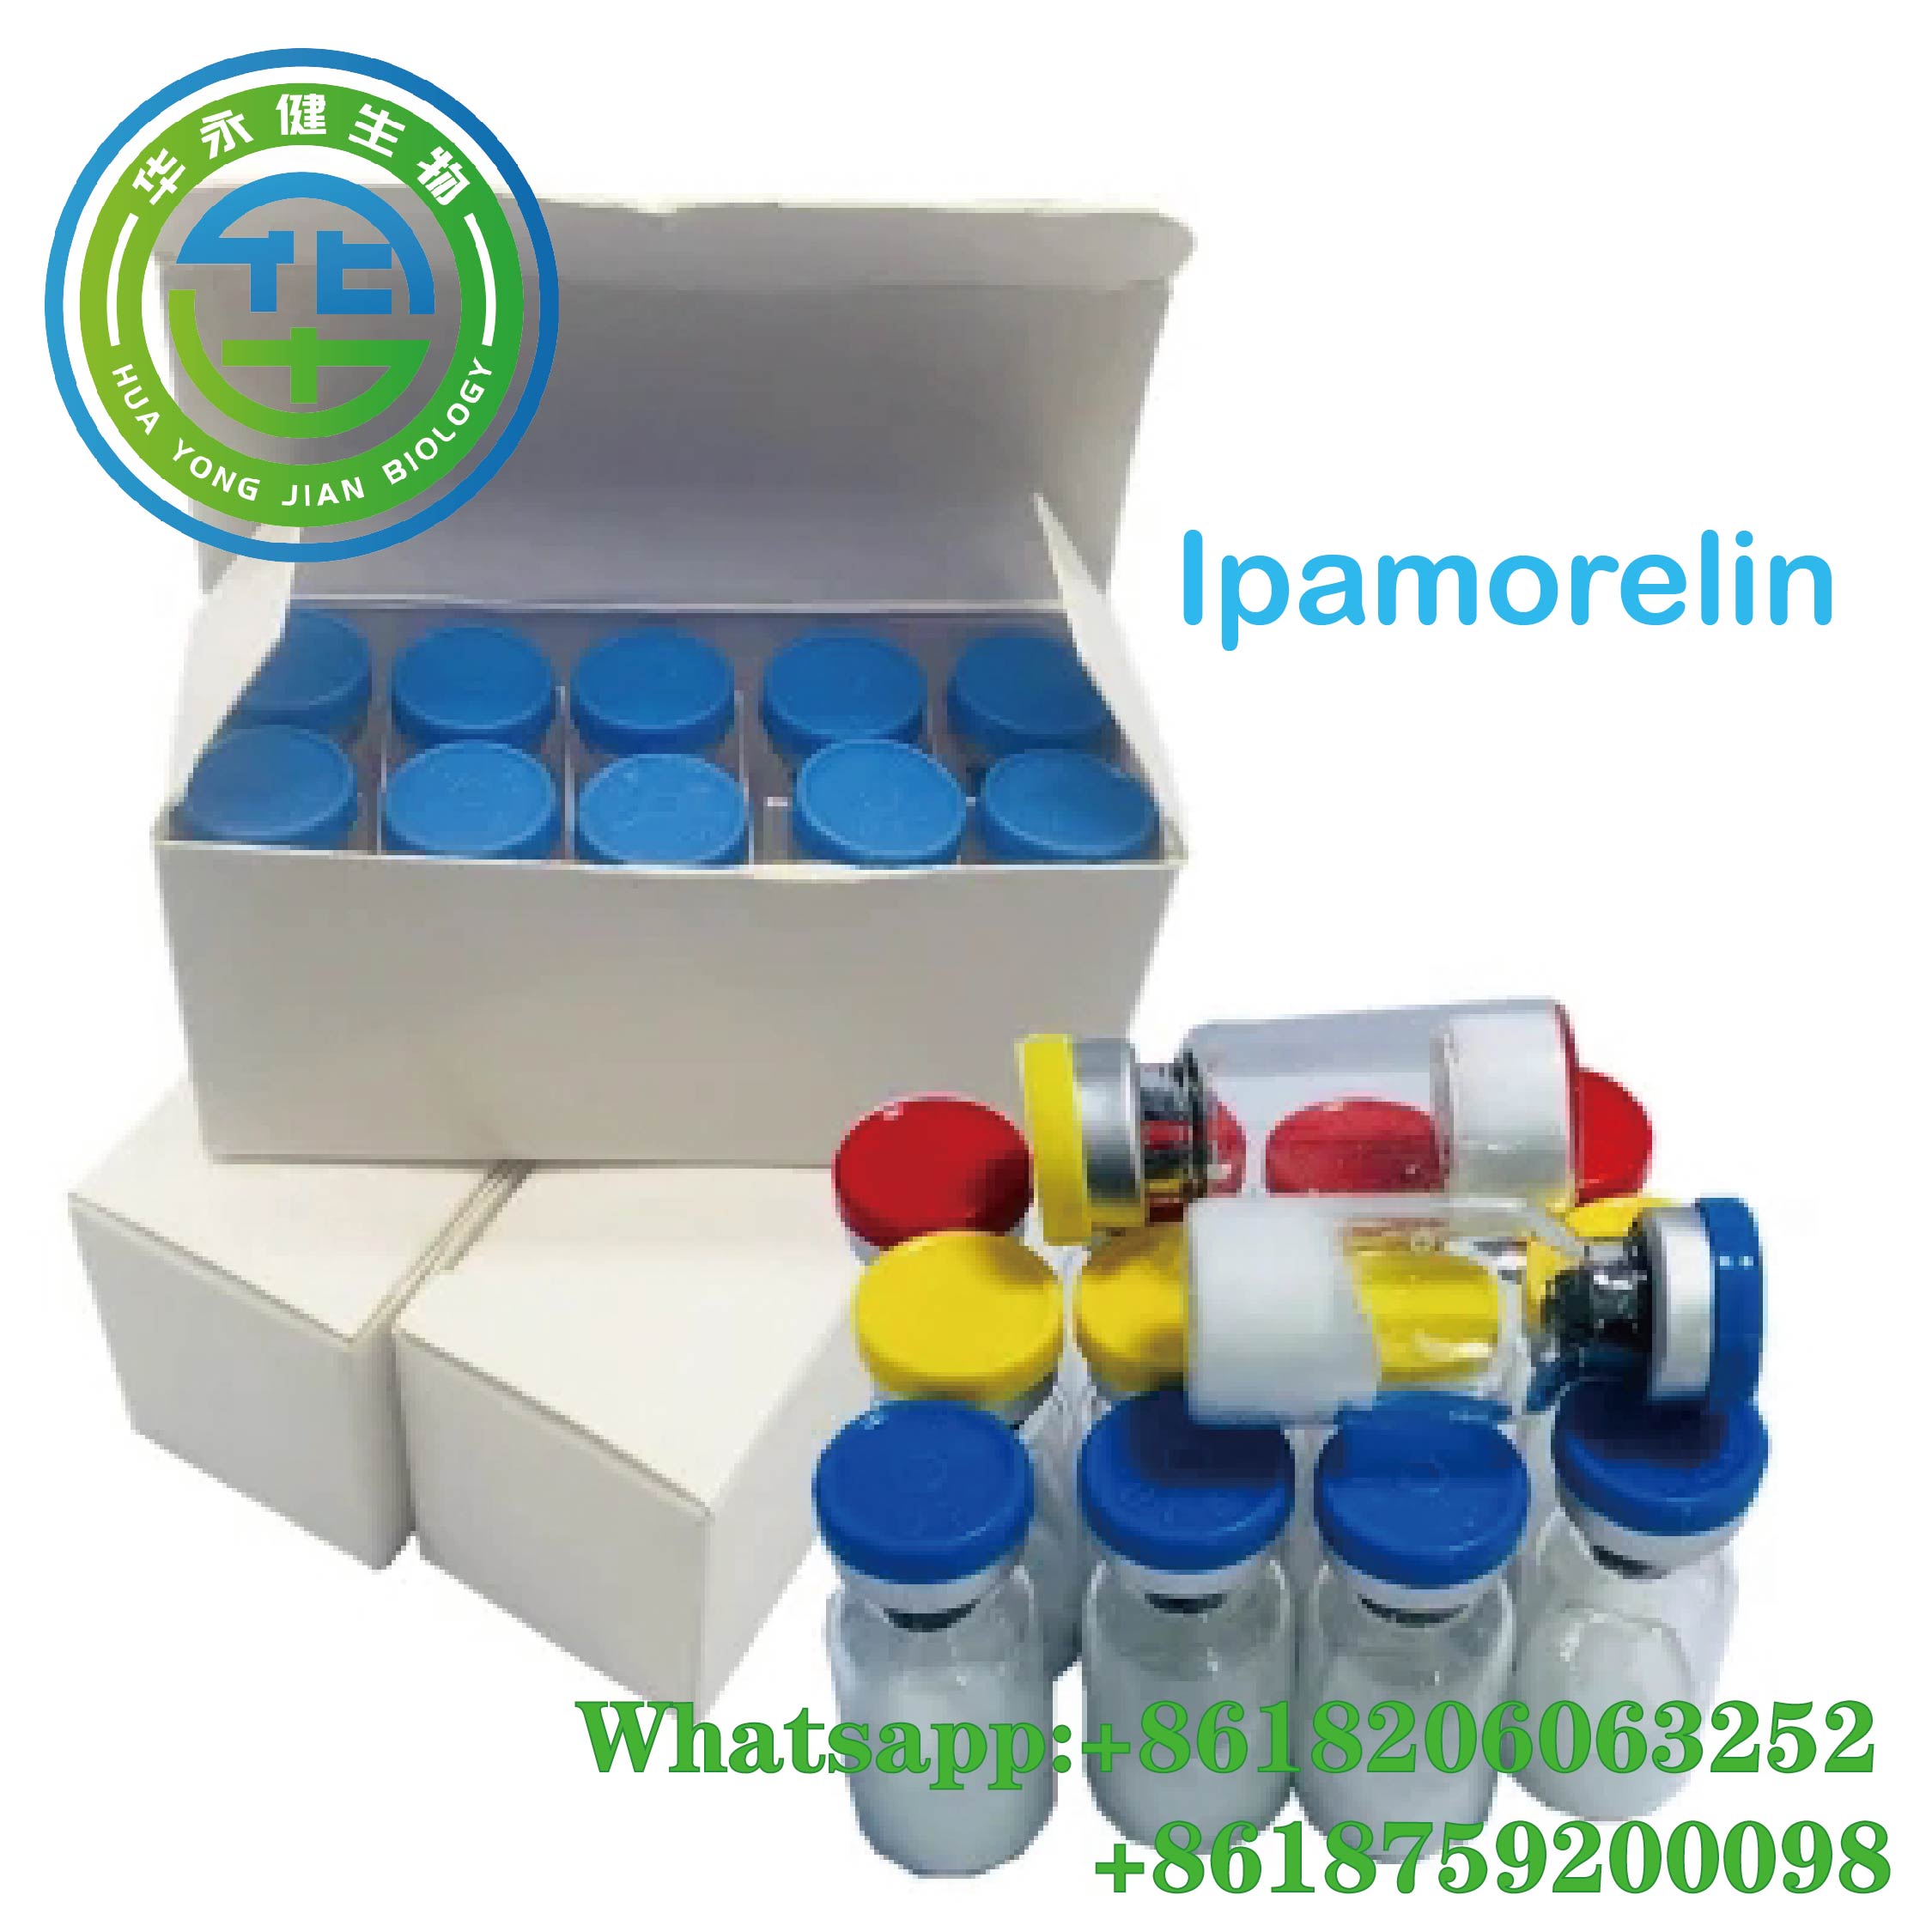  Muscle Building Peptides Supplements Ipamorelin CAS 170851-70-4 Muscle Growth Fat Burning Peptides 